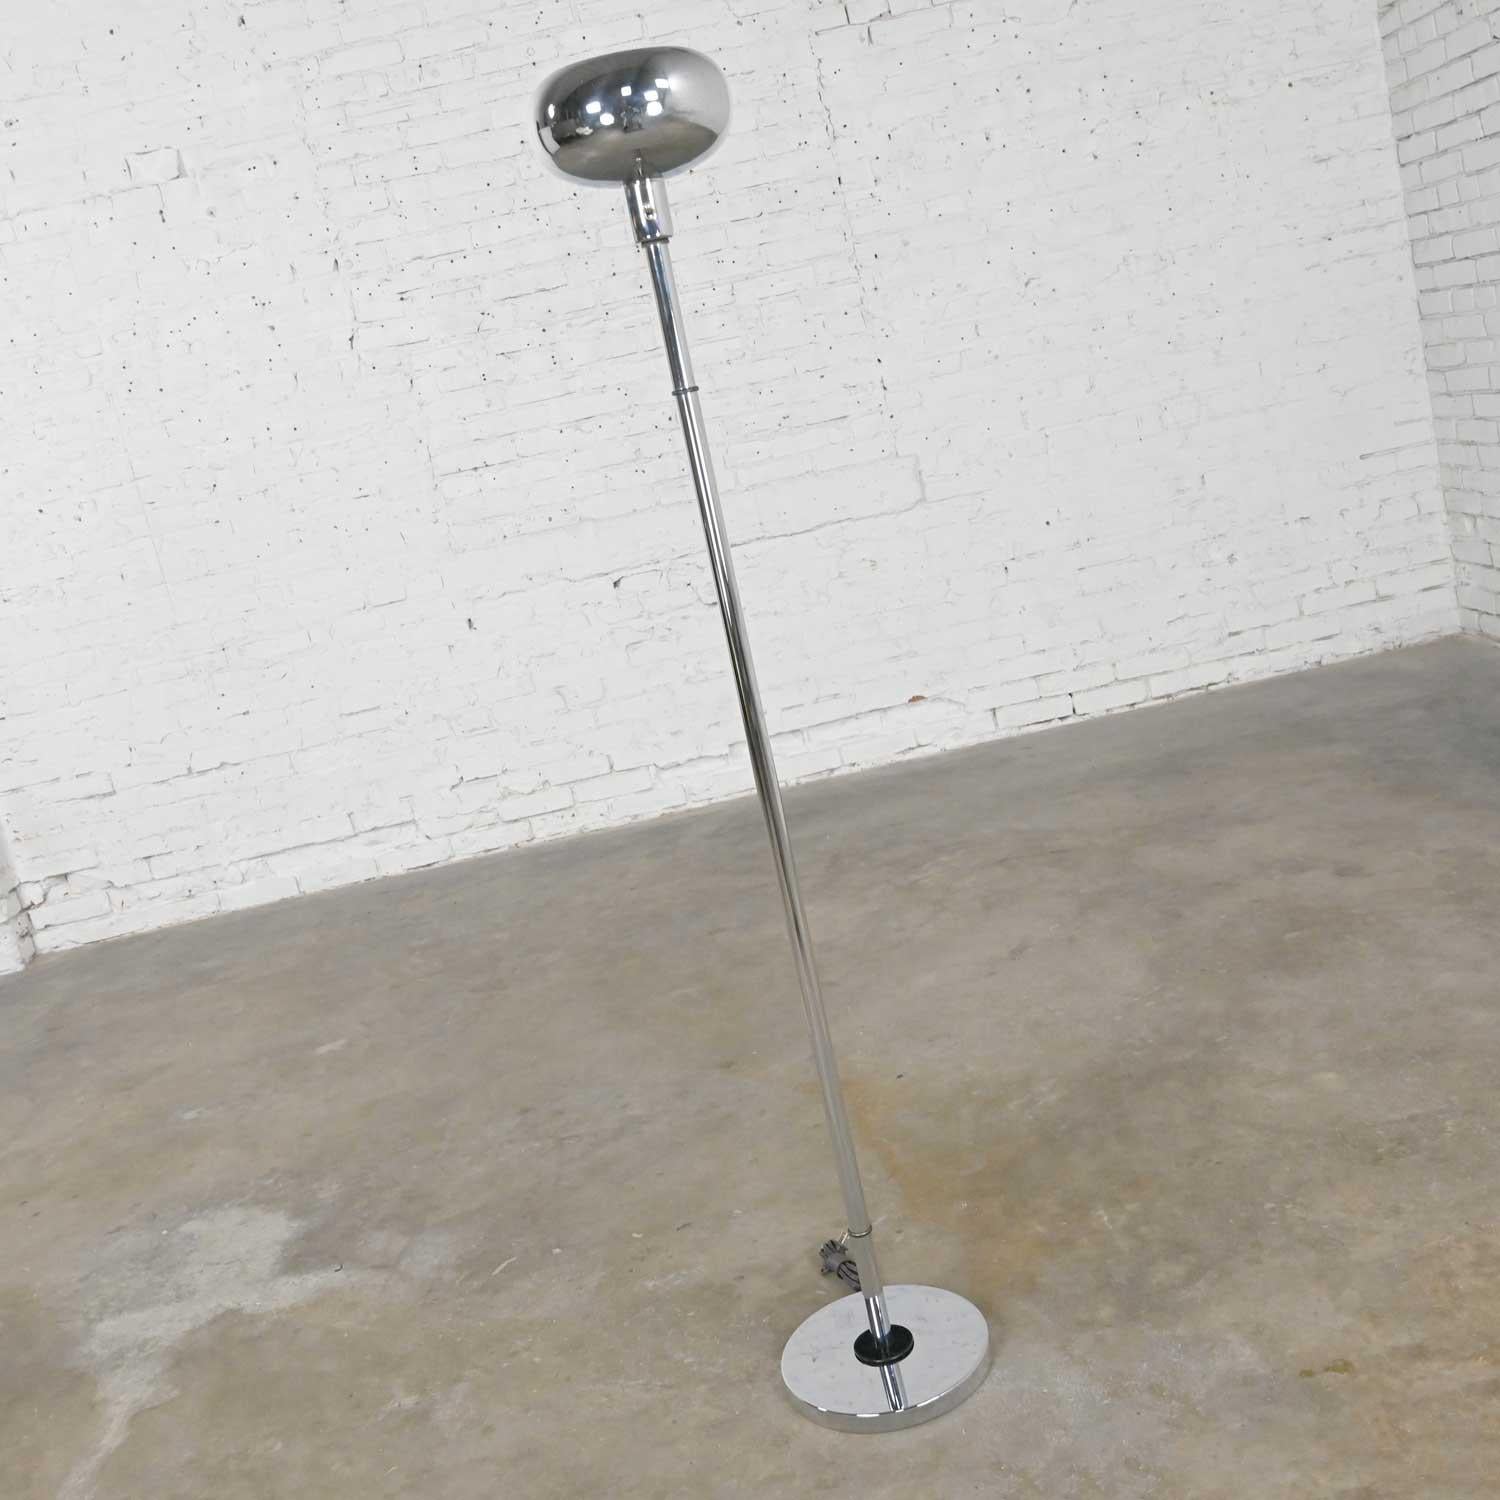 Awesome vintage Mid-Century Modern chrome torchier floor lamp with a brass switch, new chrome socket and cord, and black painted rings and details. Beautiful condition, keeping in mind that this is vintage and not new so will have signs of use and